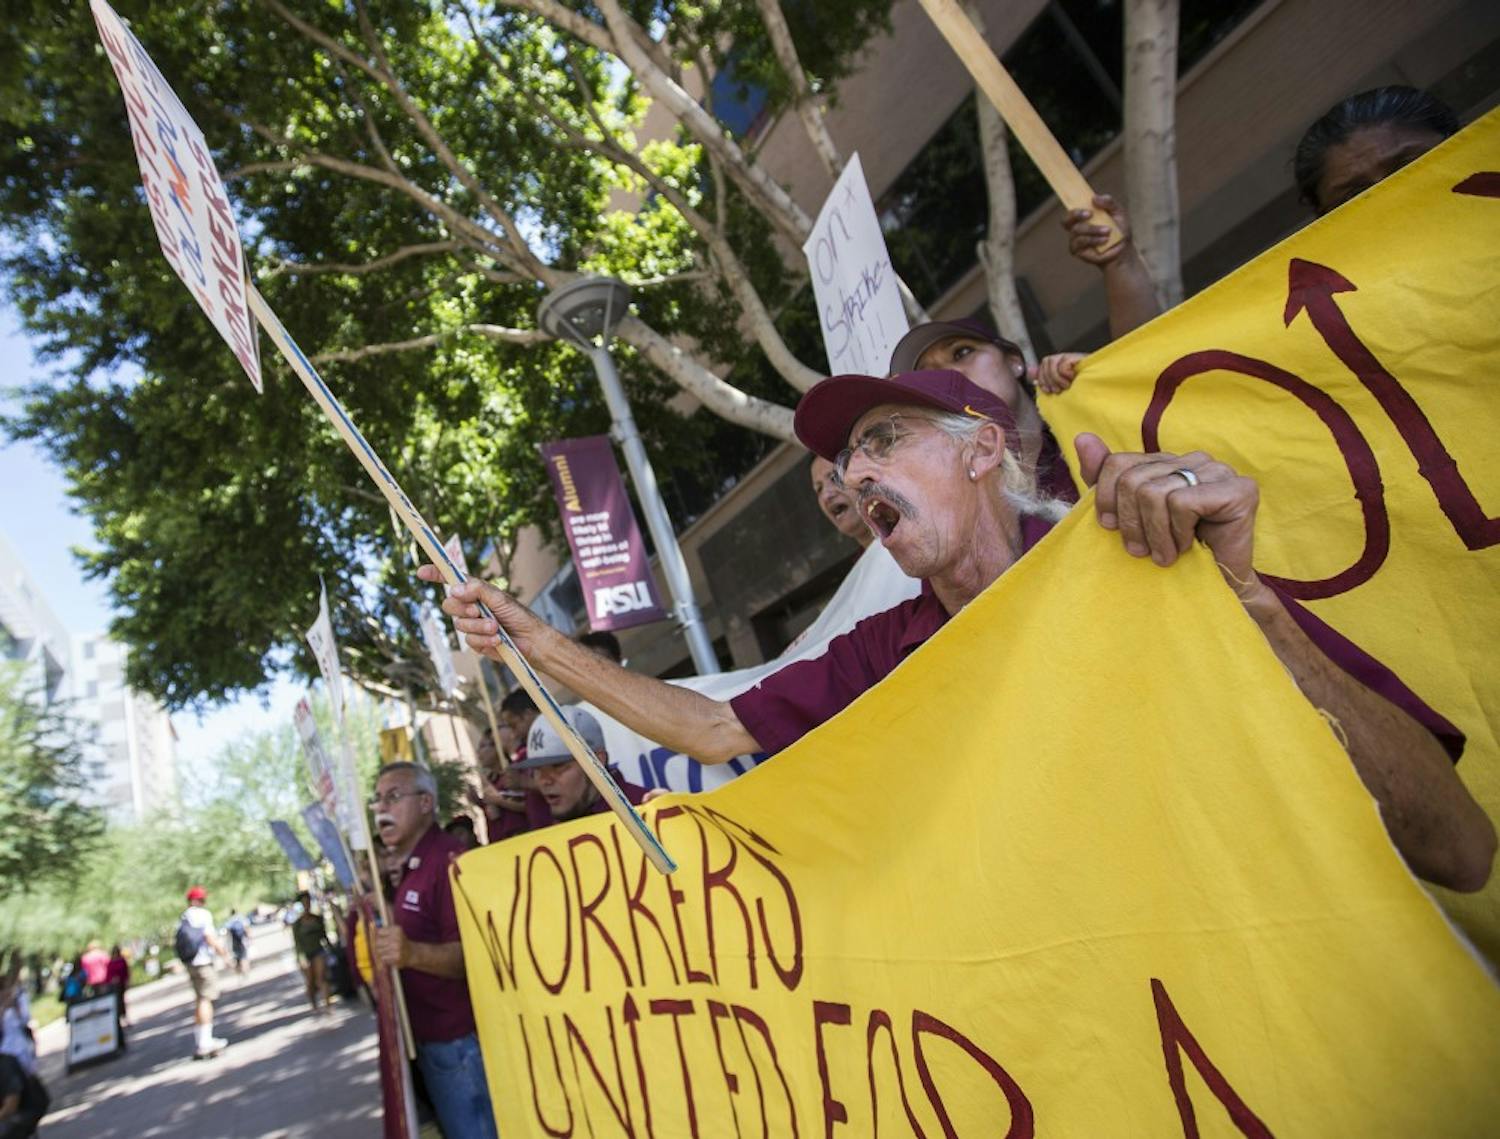 Olympus employees protest in Taylor Mall on the Downtown Phoenix campus on Thursday, Sept. 1, 2016. The employees were protesting unfair working conditions at Olympus, a company ASU contracts for janitorial services in buildings across campus. 